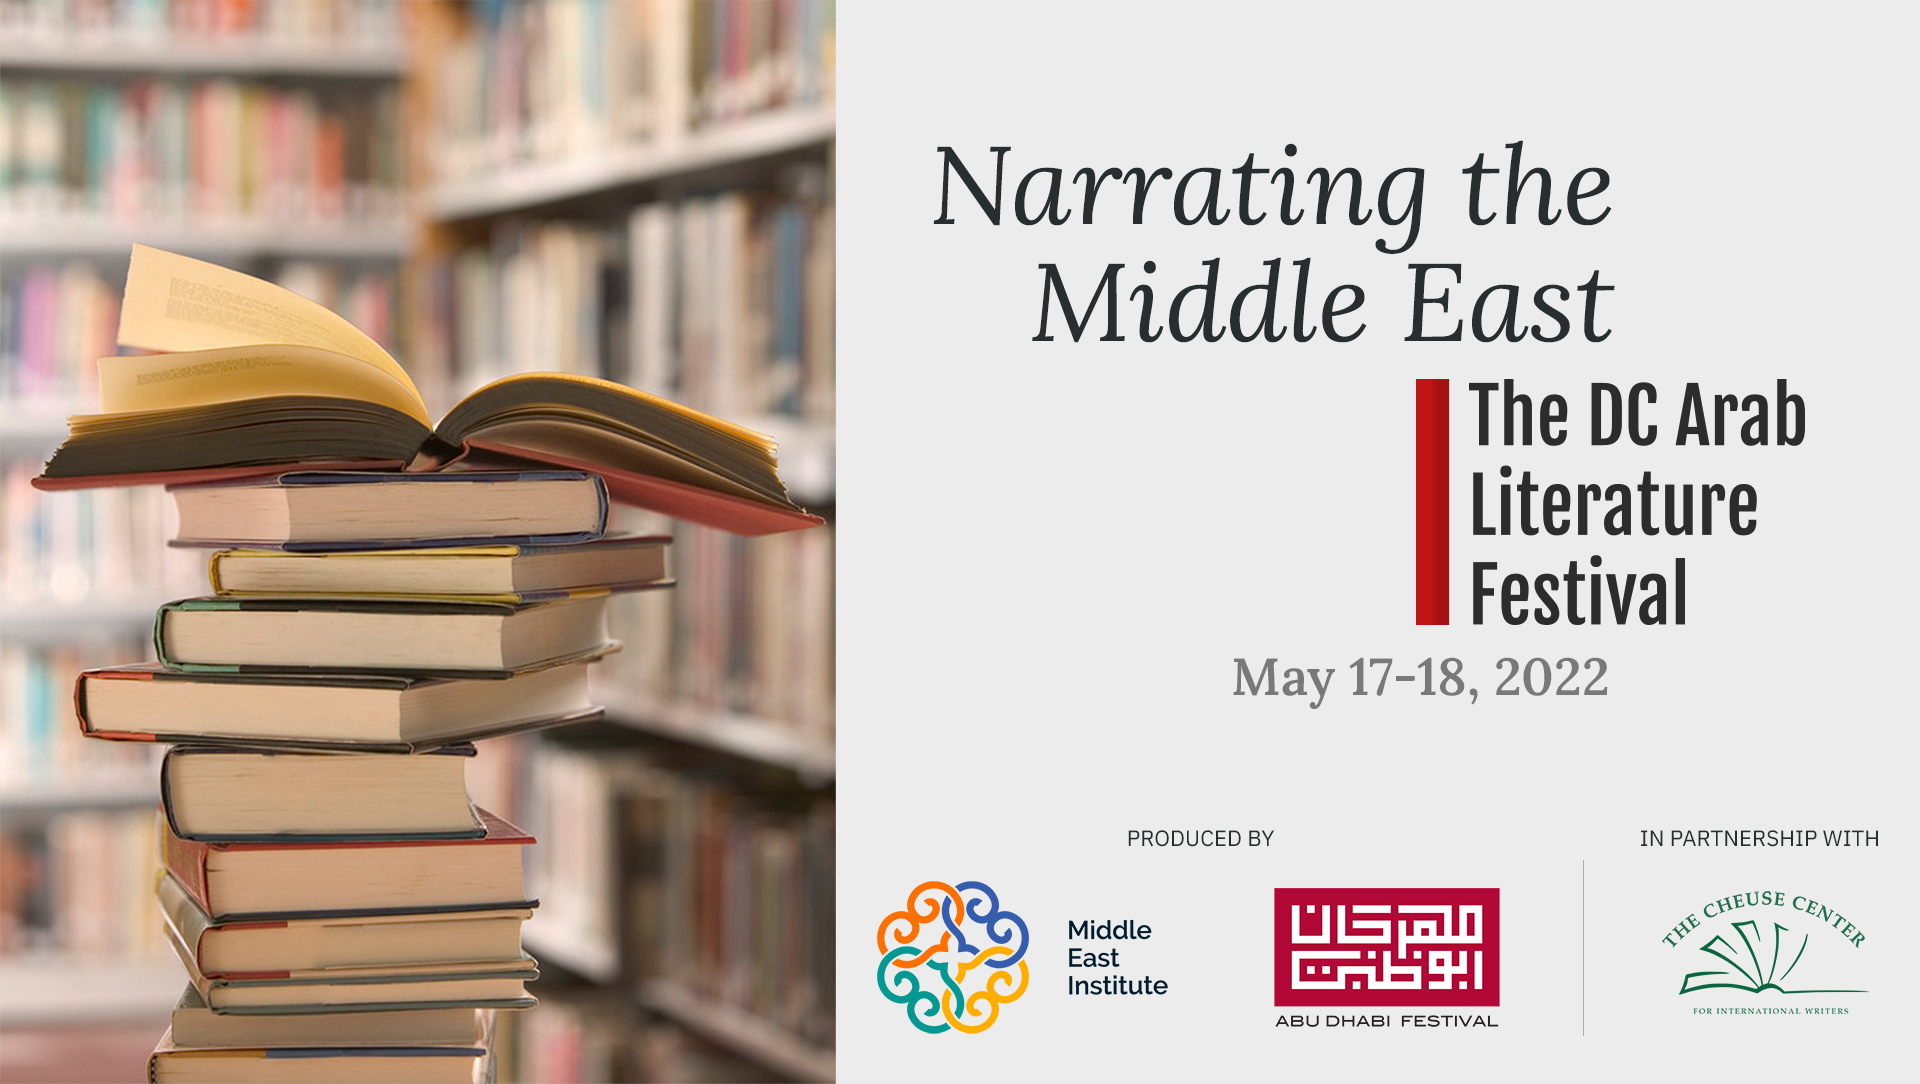 The 2022 DC Arab Literature Festival Narrating the Middle East